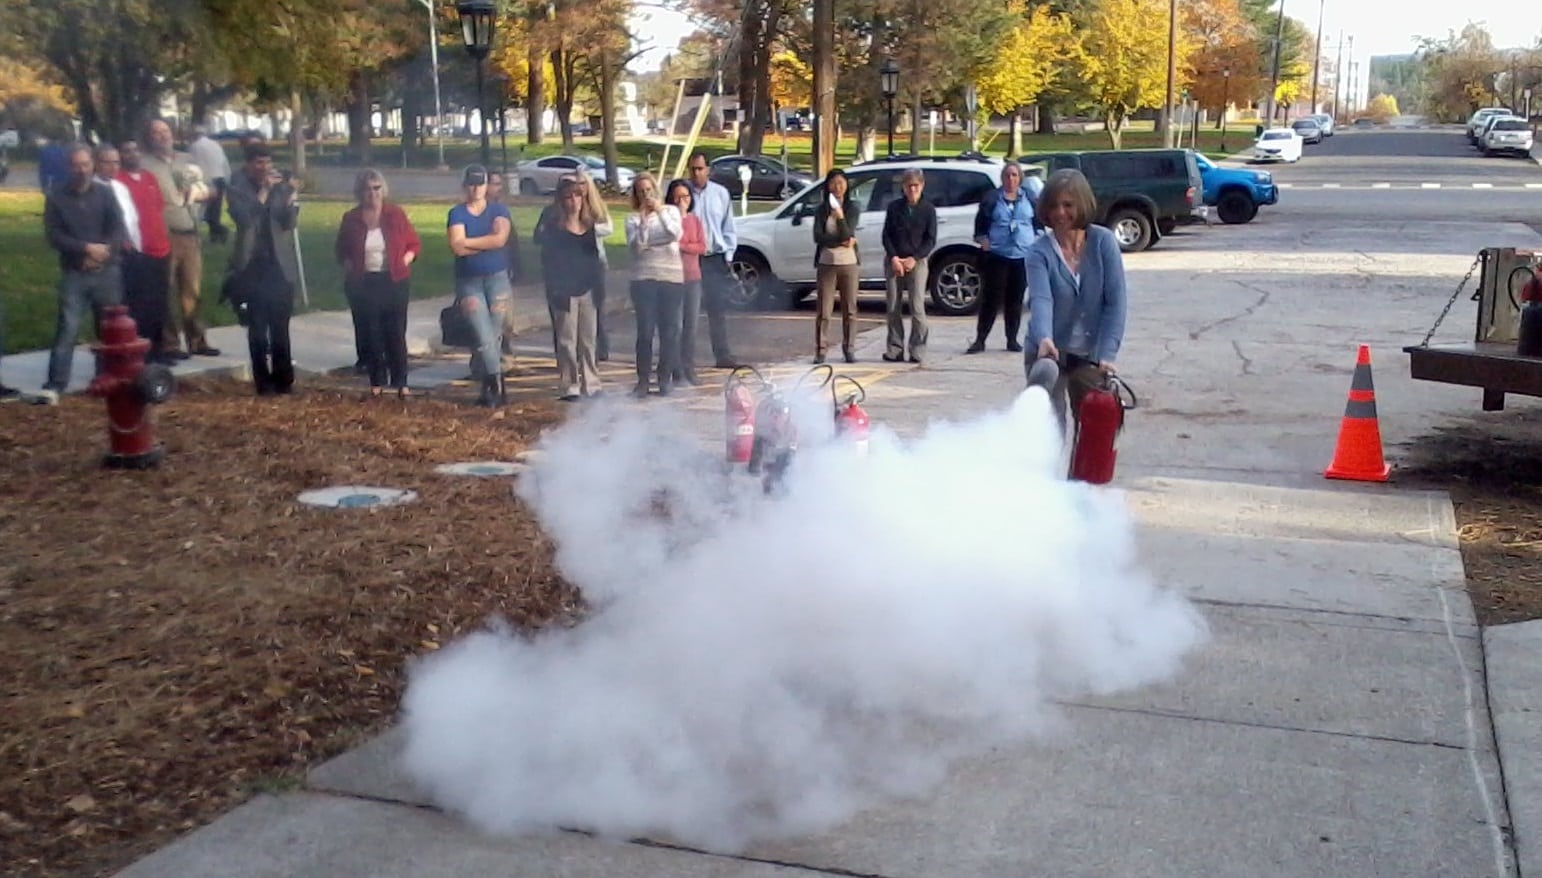 Putting out fires at EWU Fire Extinguisher Training